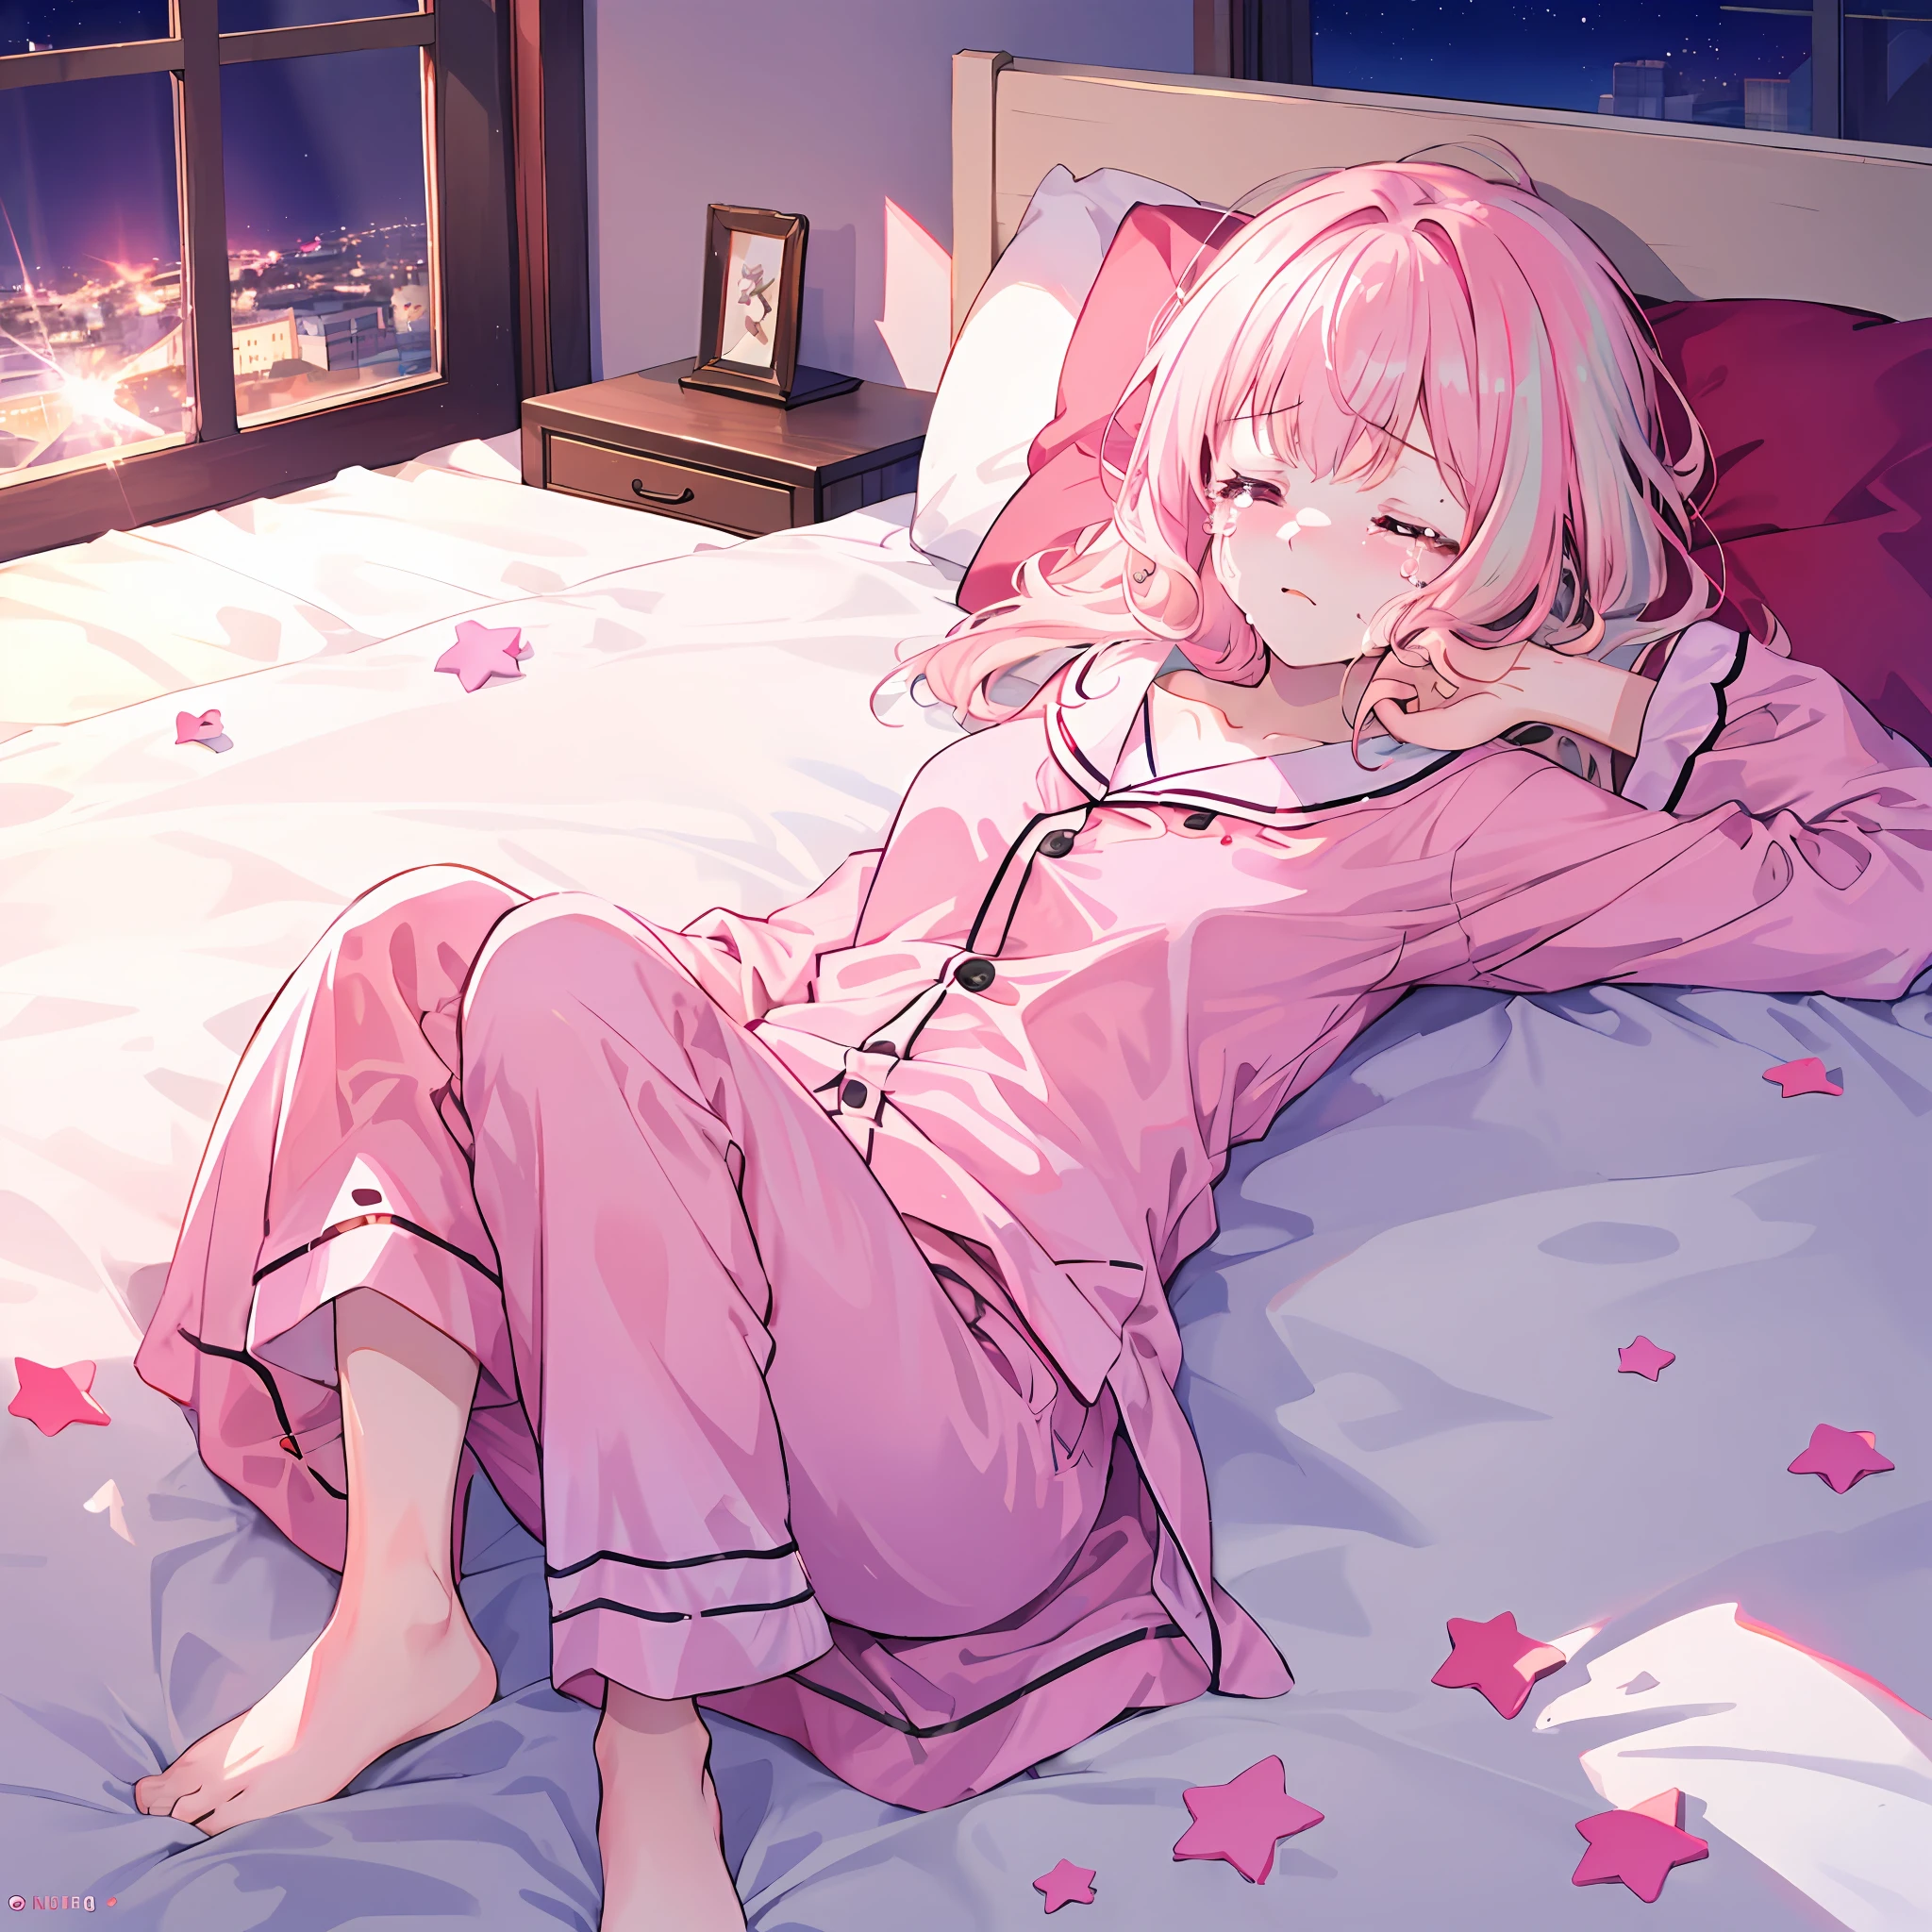 Top Quality, Masterpiece, High Definition, Very Detailed, 8K, One Girl, Cute, Anime, Crystal Clear White Skin, Sensual, Full Body, Junior High School, 14 Years Old, (Hair Color Shining Light Pink), Cute Summer Pajamas, Sleeping Like Dead On Beautiful Cute Bed, Tears, Frightened, Scared, Midnight